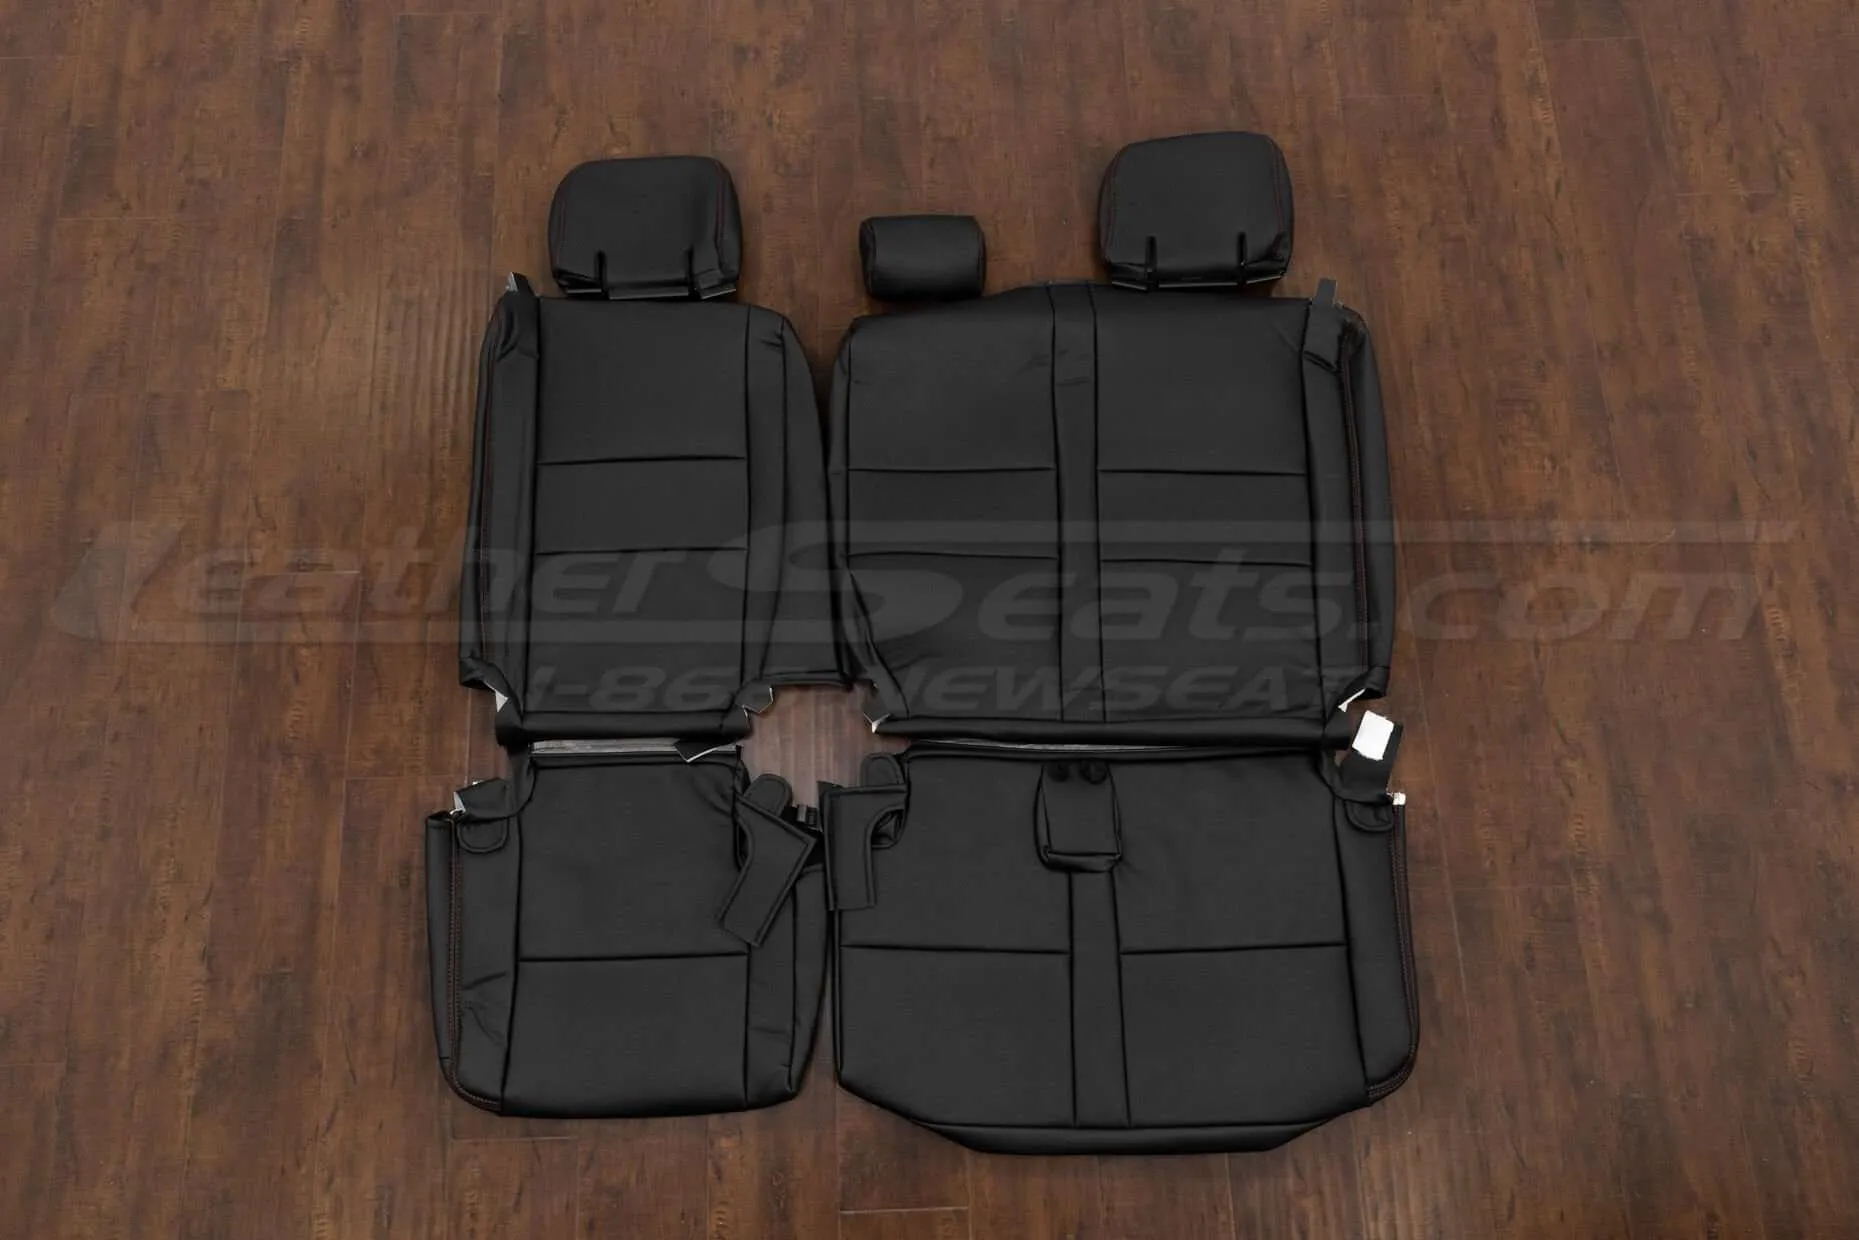 Toyota Sequoia Leather Seat Kit - Black - 3rd Row upholstery